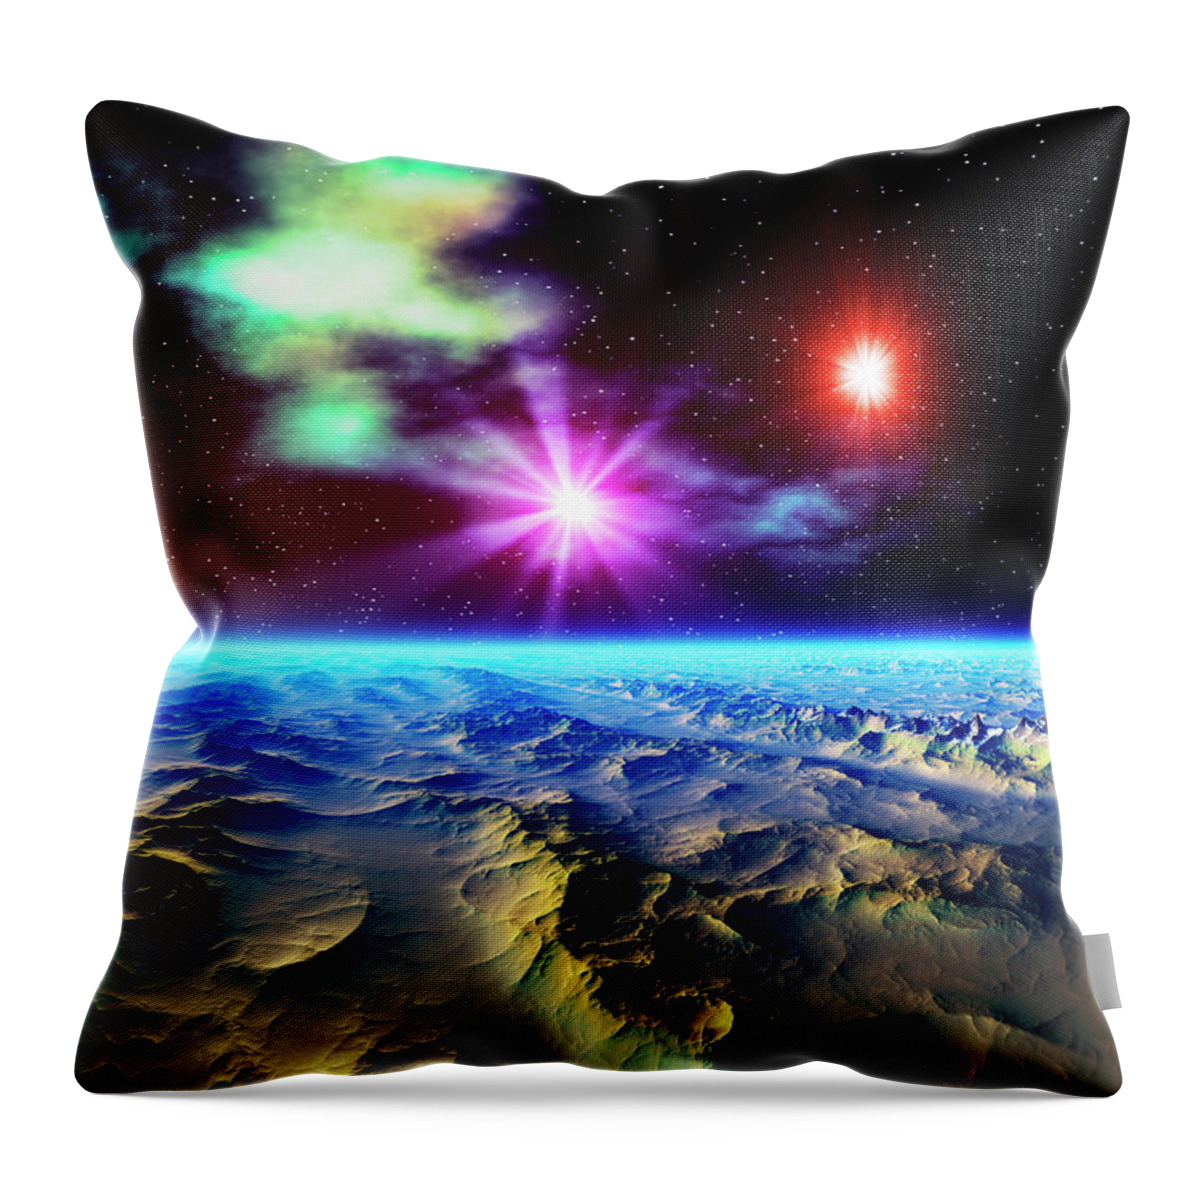 Outdoors Throw Pillow featuring the digital art Rock Formation And Sky With Stars by Kazuhisa Akeo/a.collectionrf